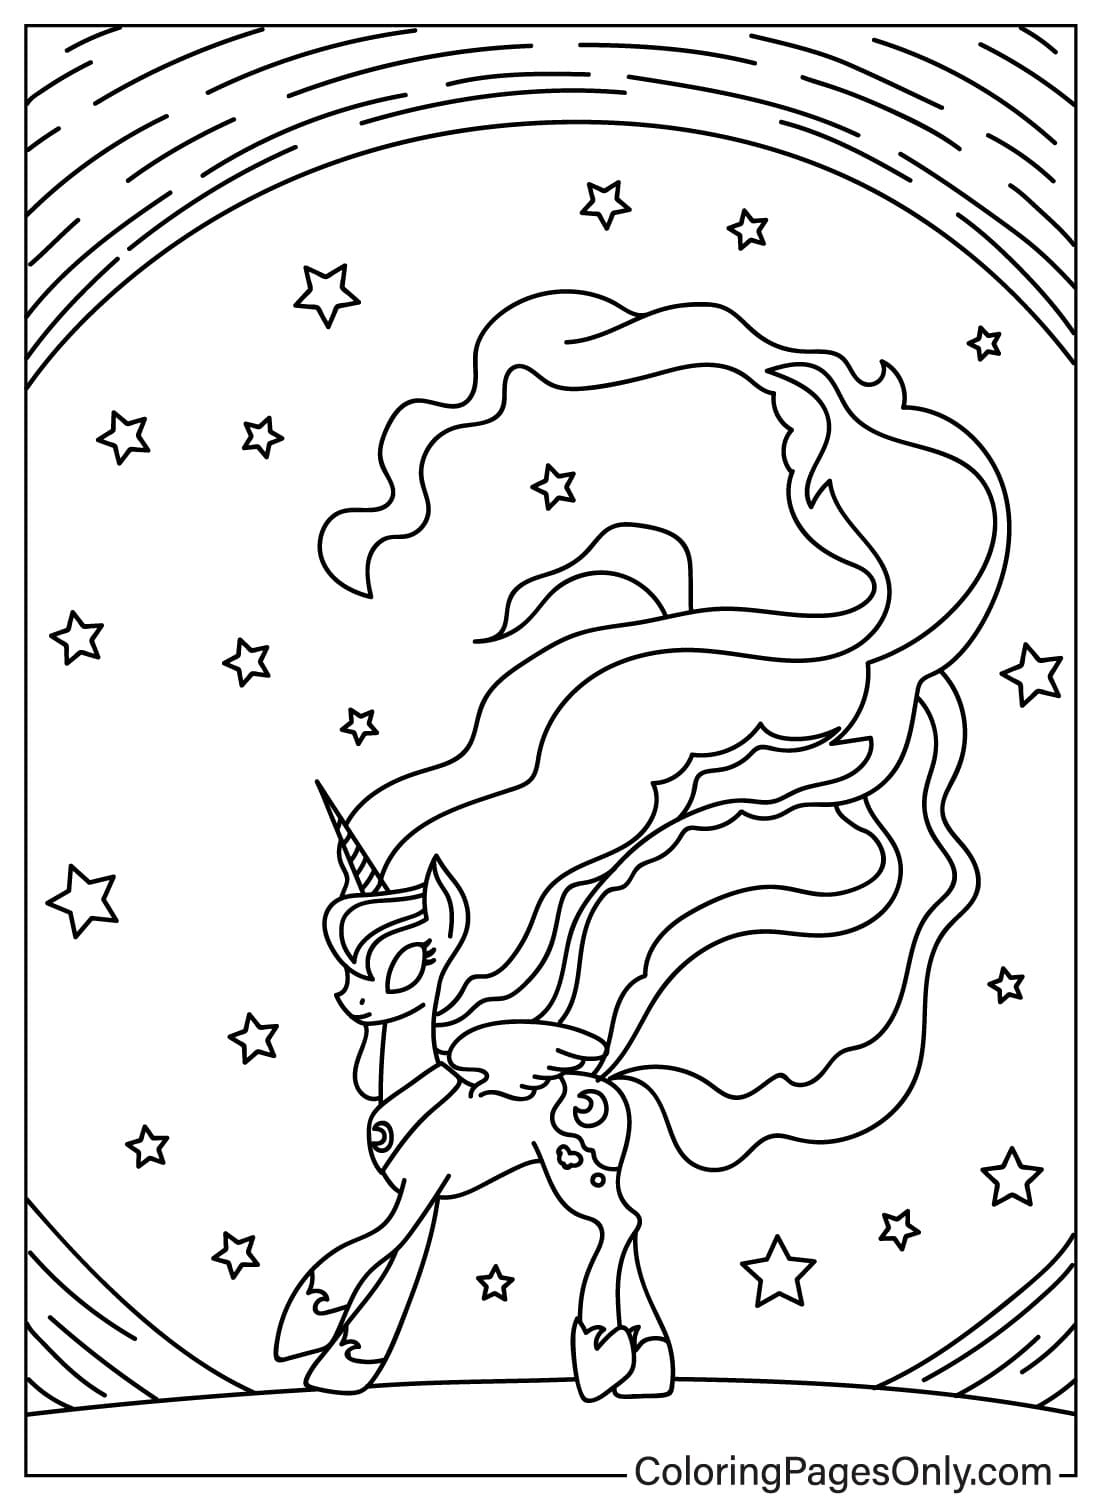 Princess Luna and the Starry Sky Coloring Page from Princess Luna